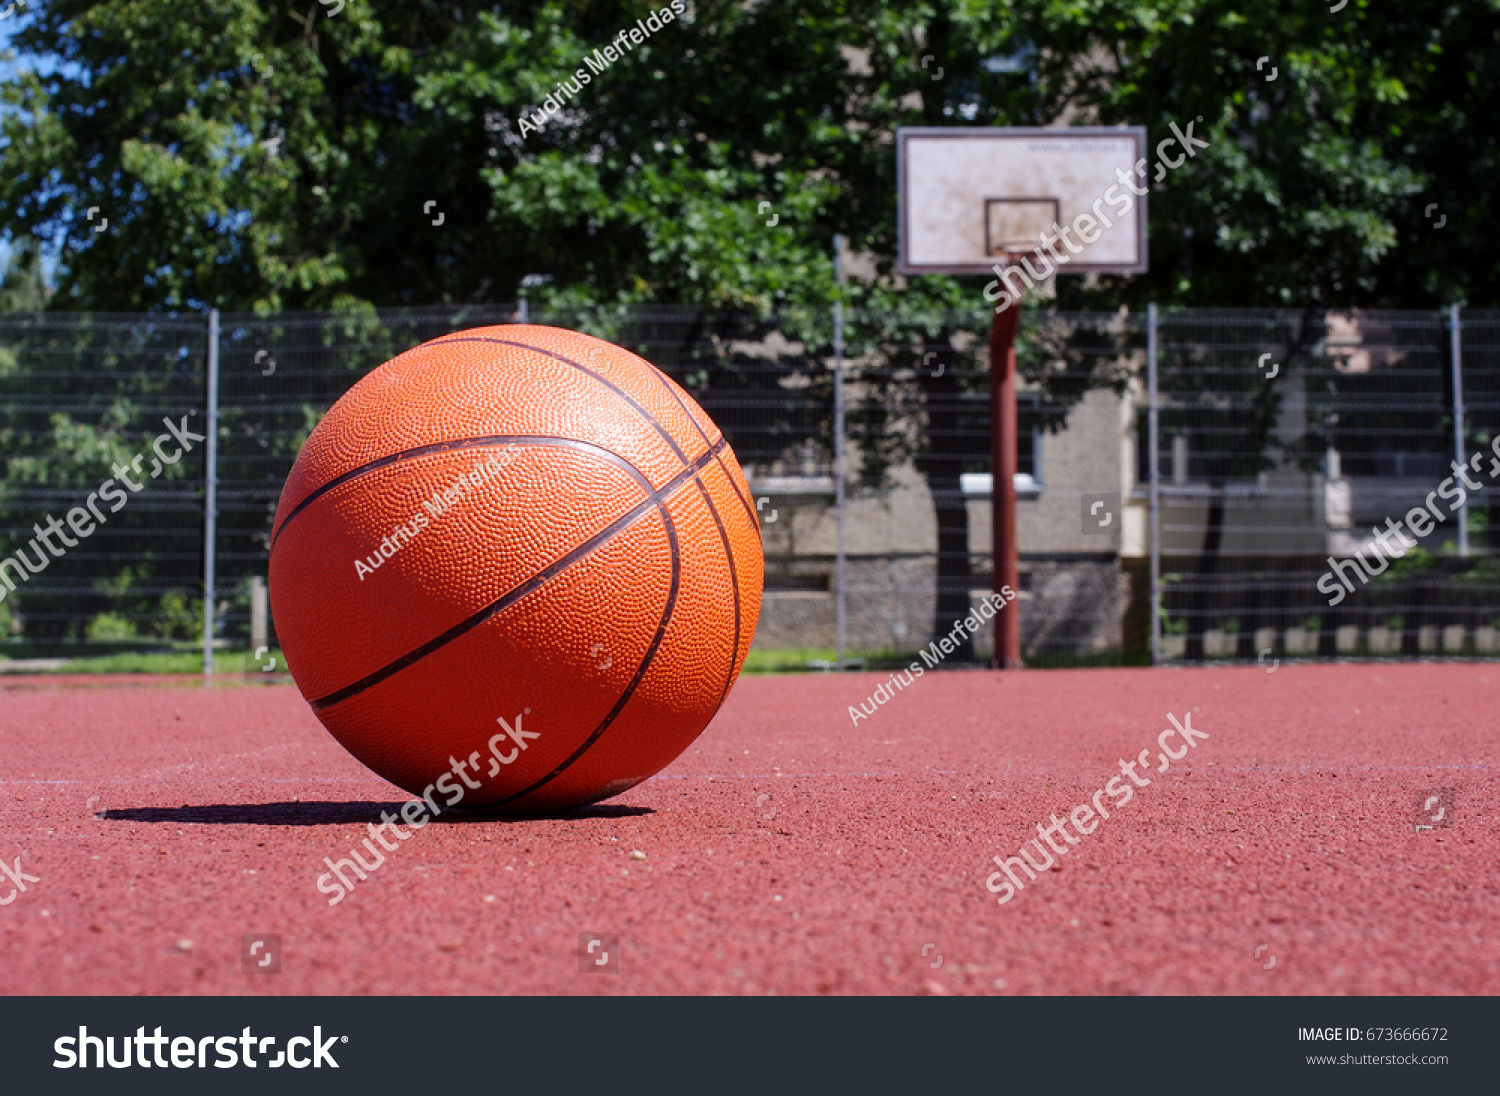 Basketball ball in the outdoors court sunny day #673666672